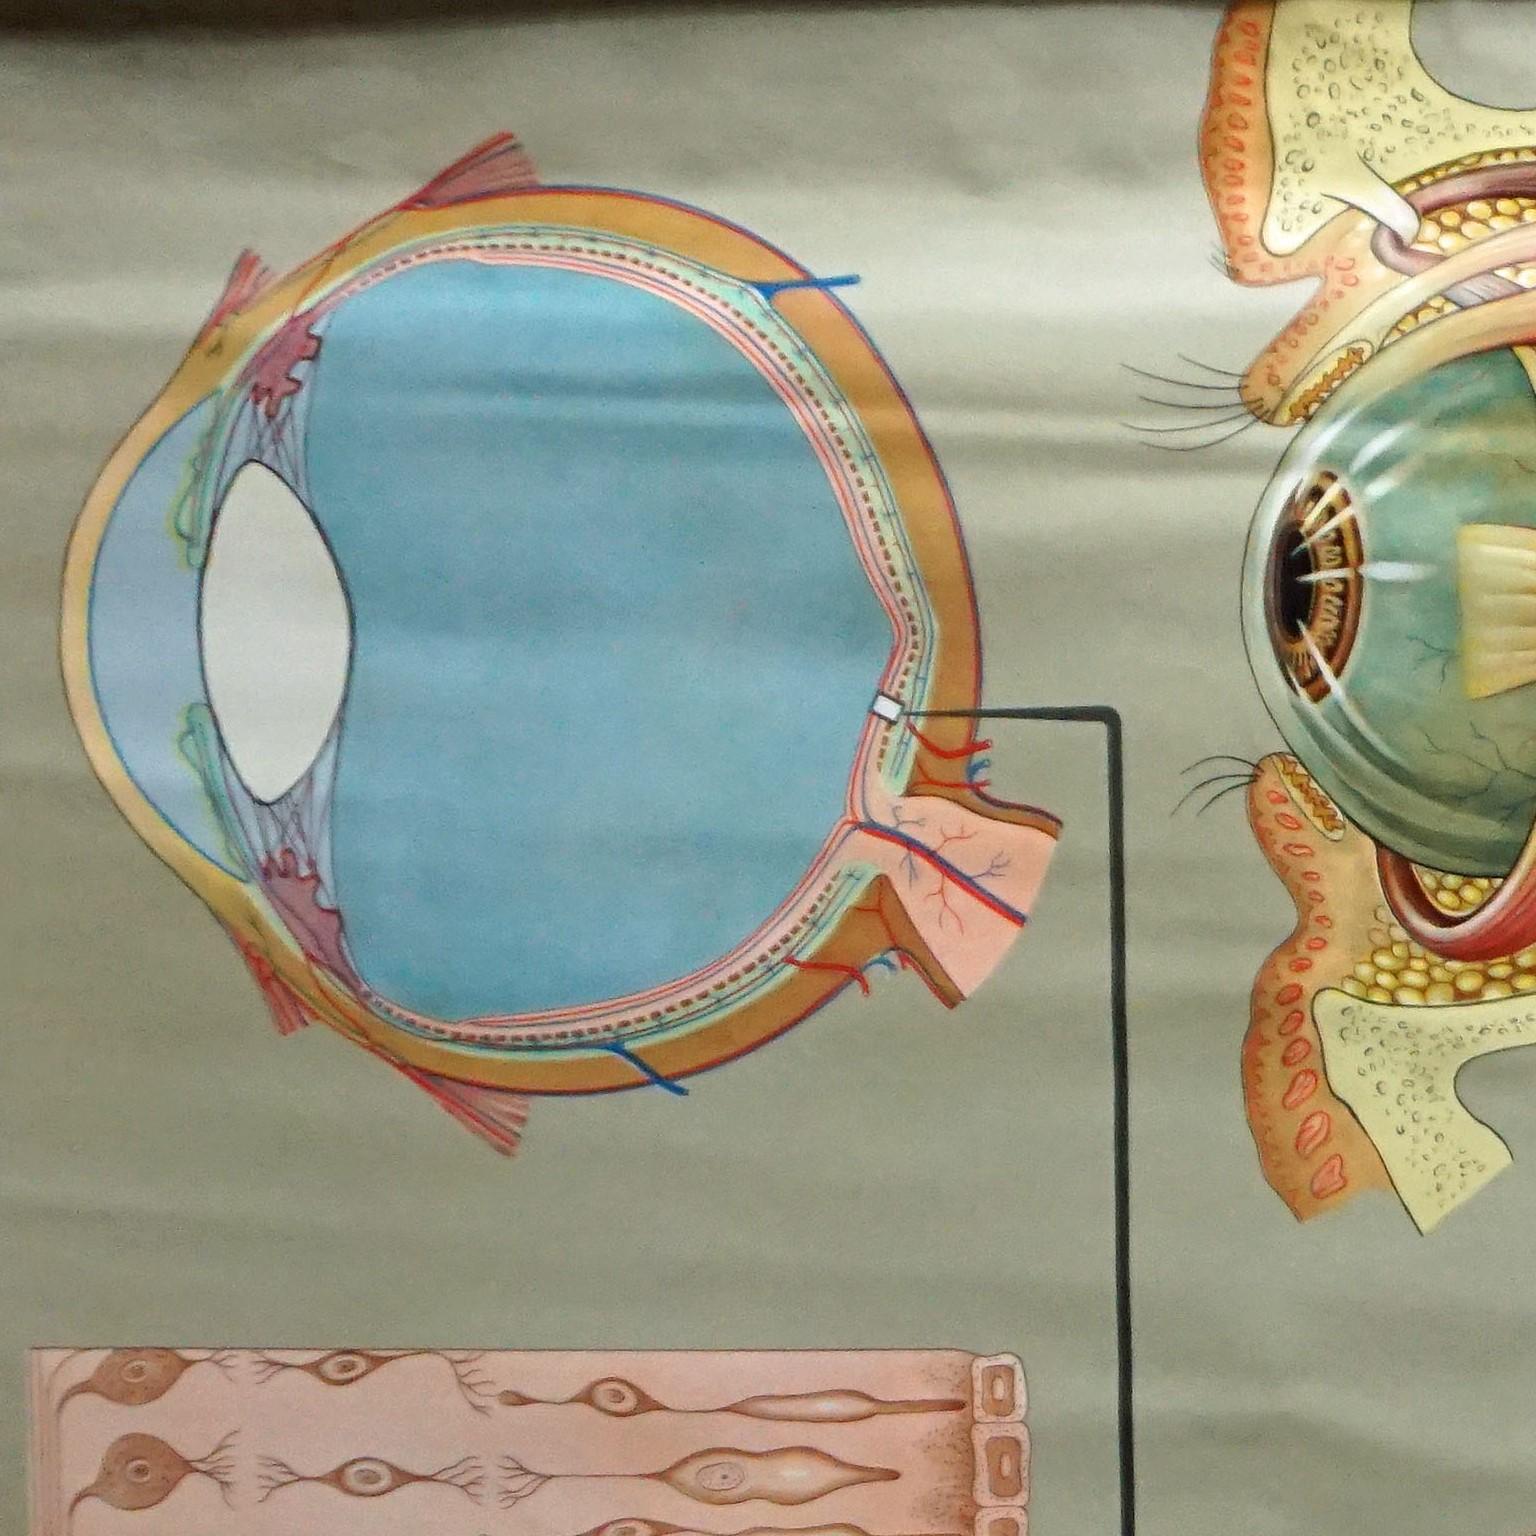 A highly detailed medical pull-down wall chart illustrating the human eye and its function. Published by Lehrmittelverlag Hagemann, Duesseldorf. Colorful print on paper reinforced with canvas.
Measurements:
Width 166,50 cm (65.55 inch)
Height 114,50